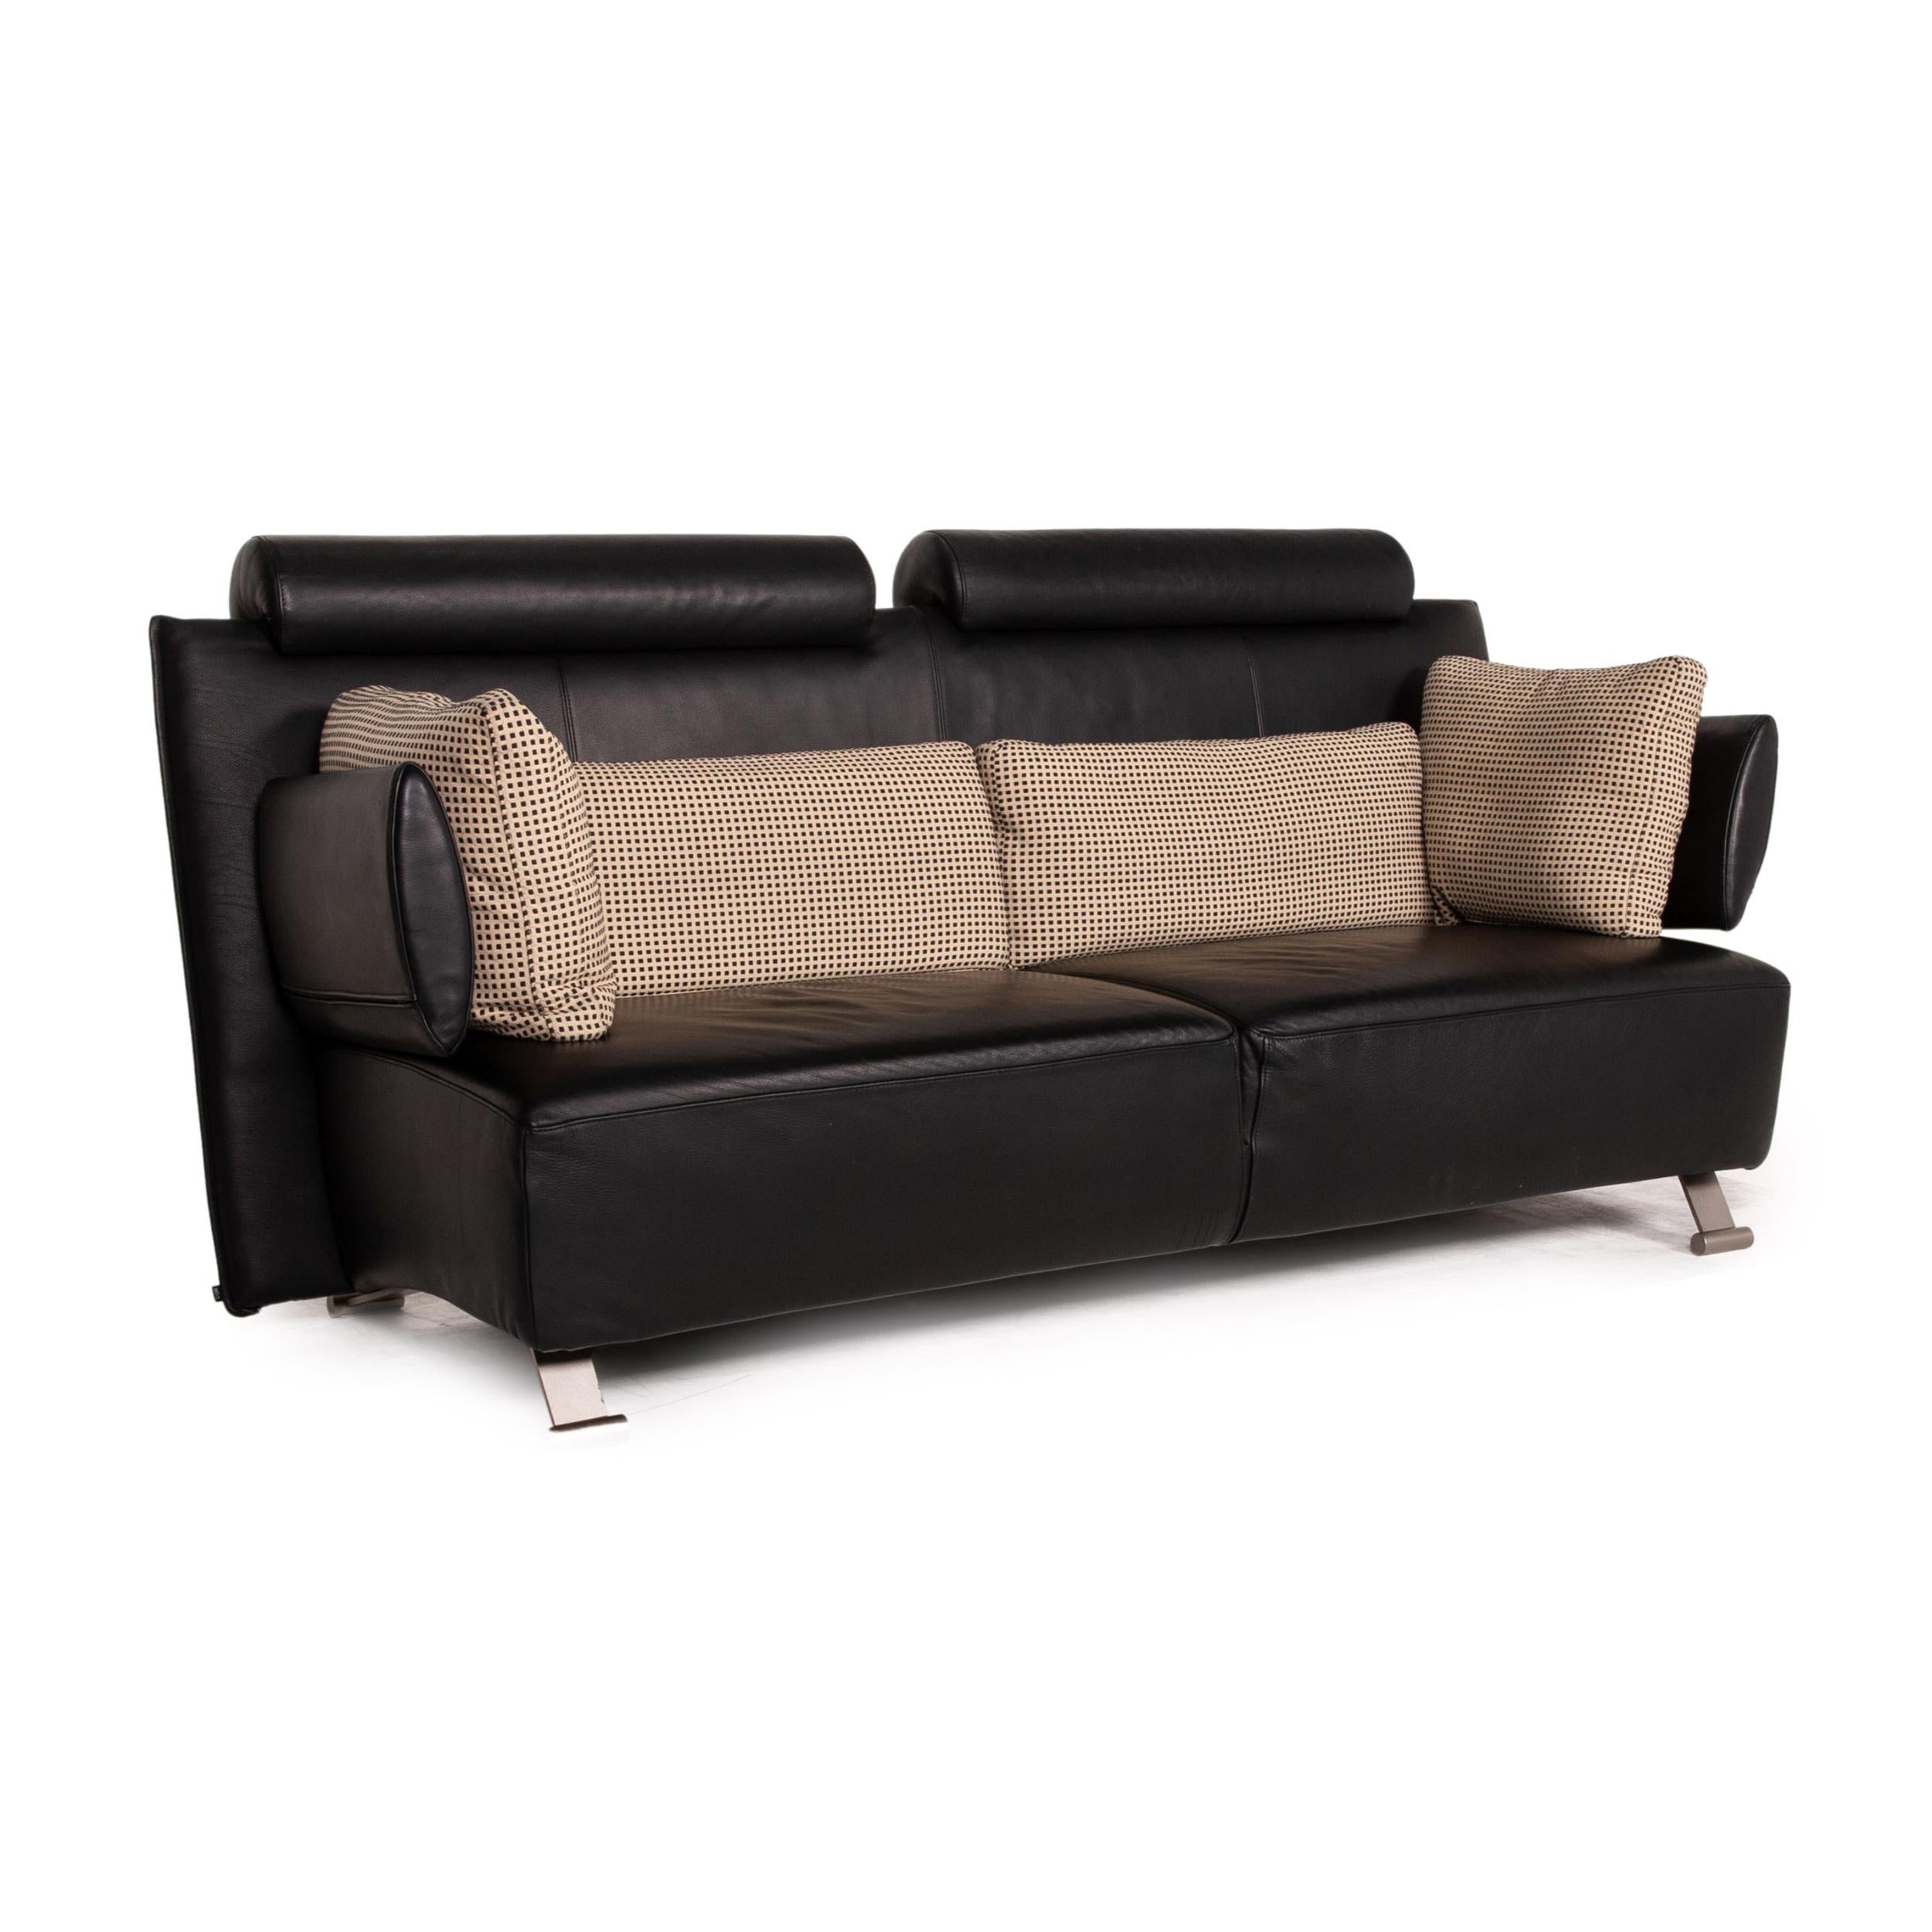 COR Sera Leather Sofa Black Two-Seater Function Couch For Sale 2